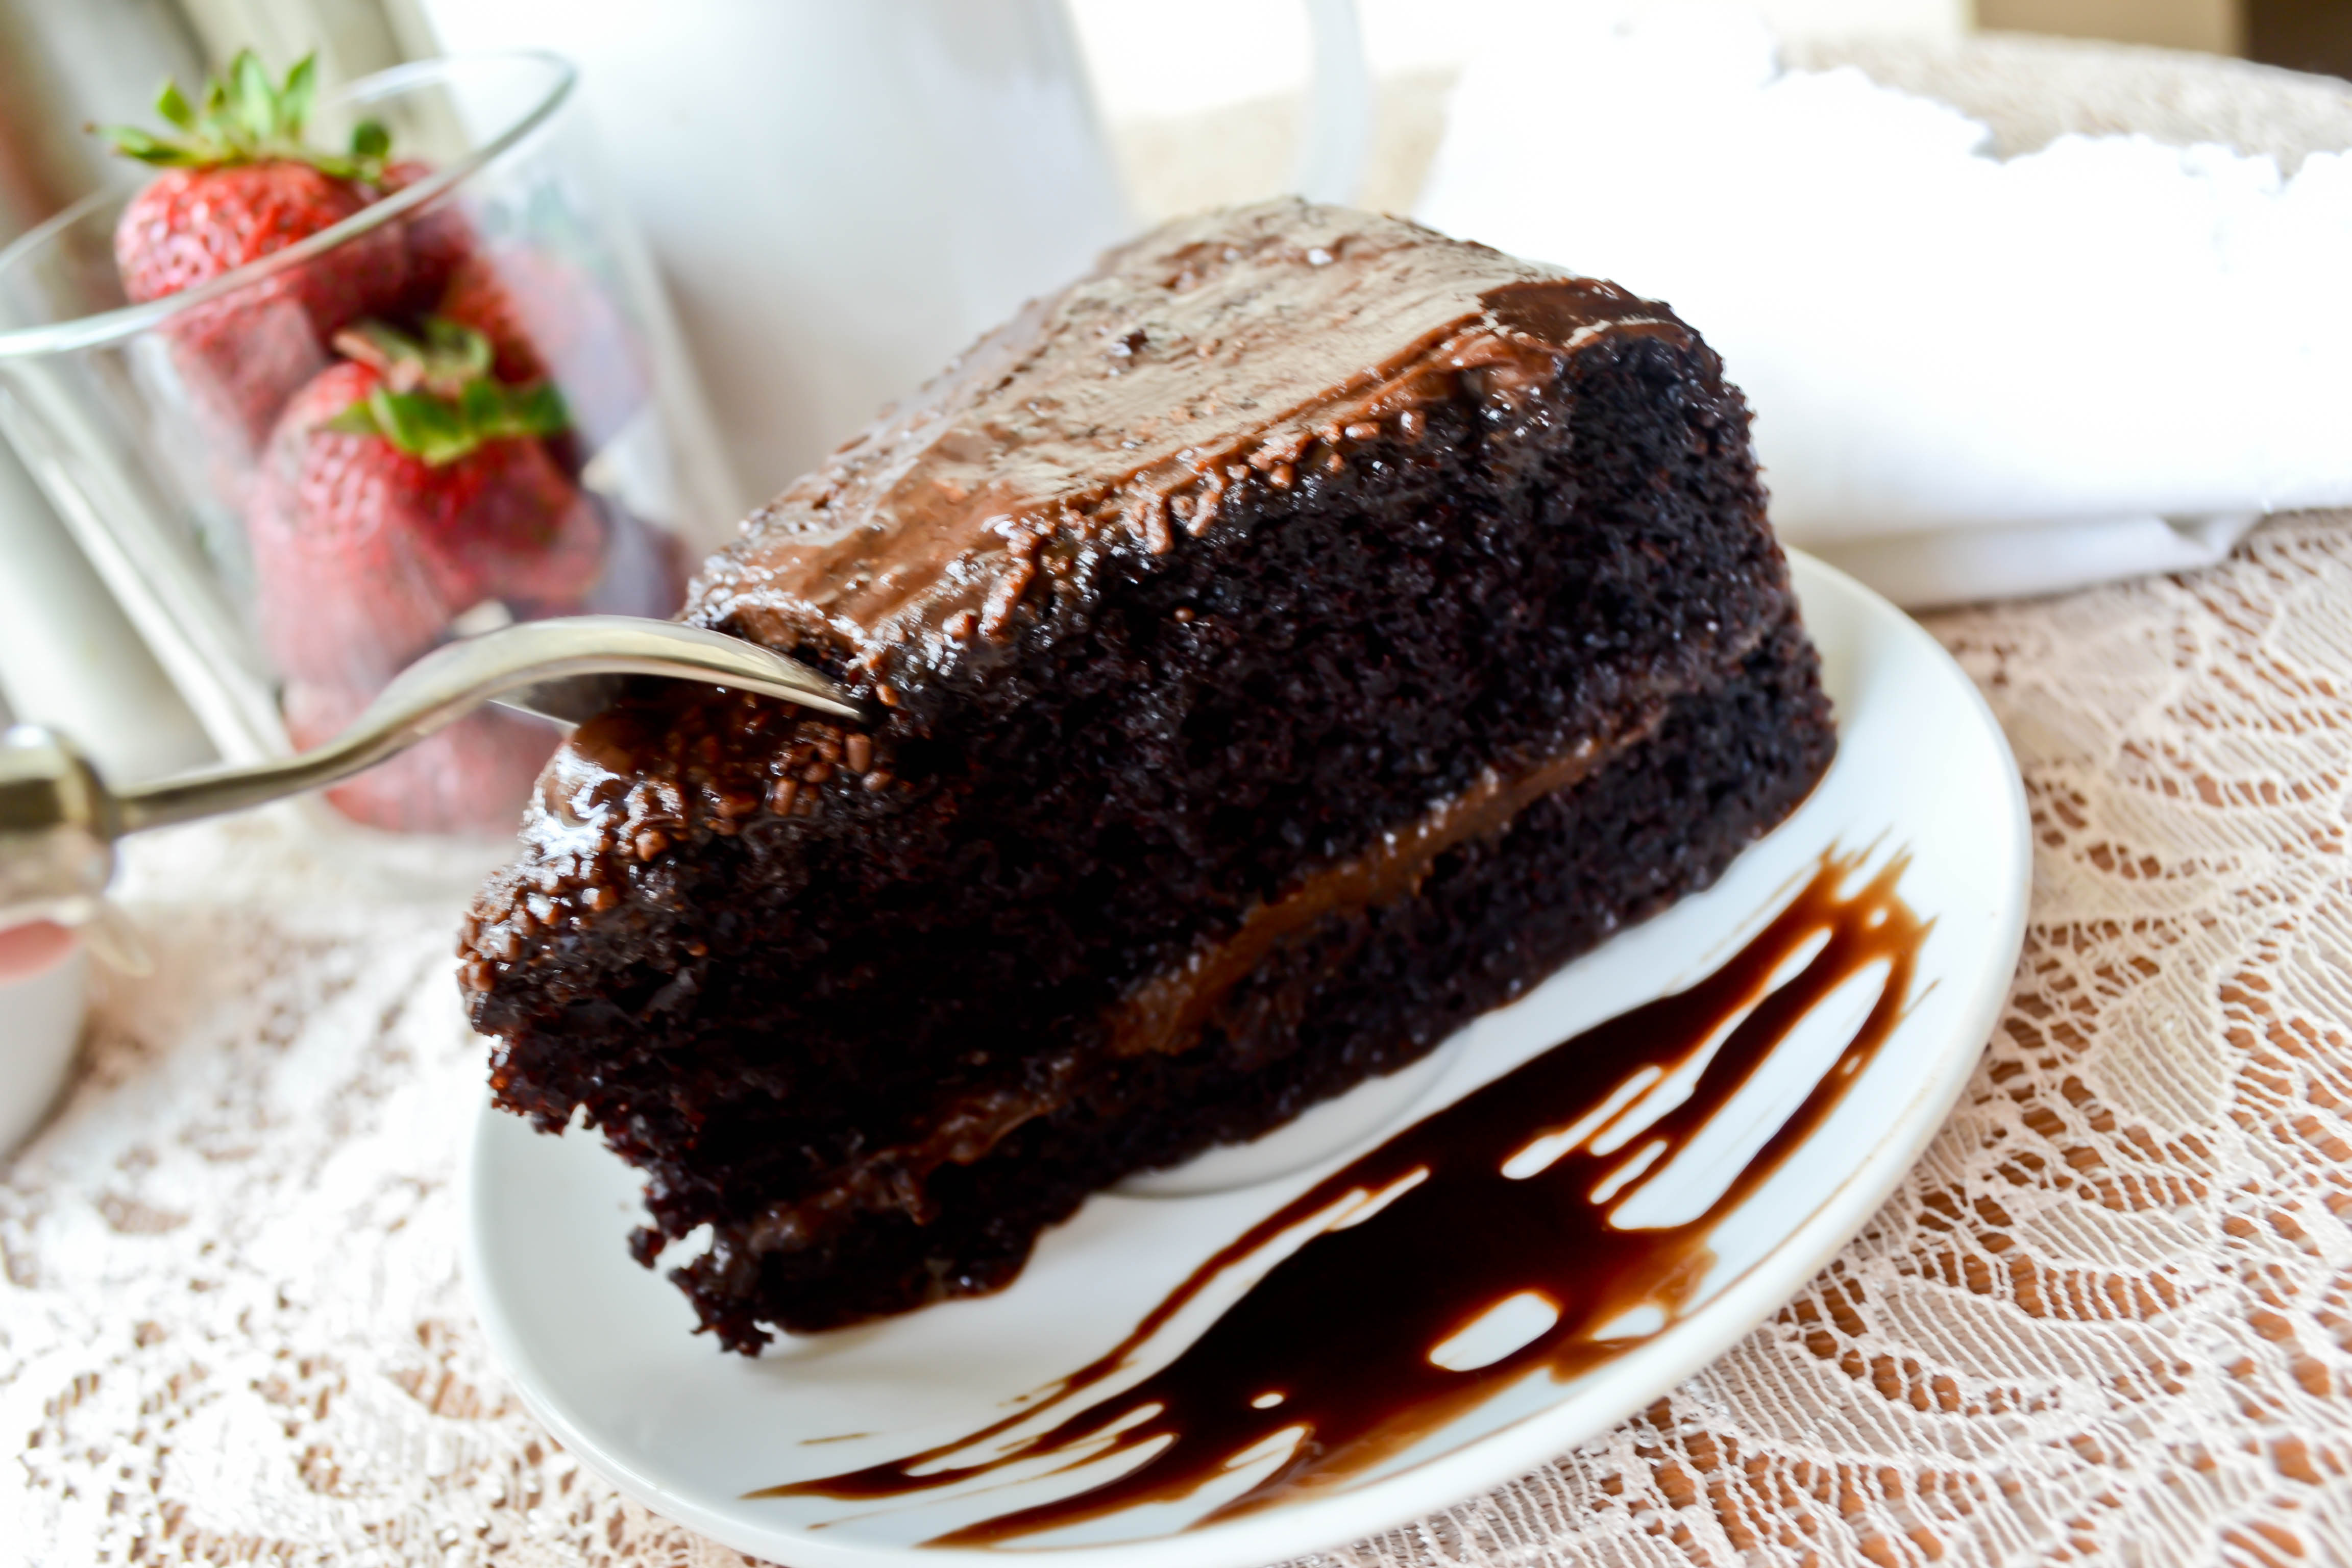 Image result for chocolate cake